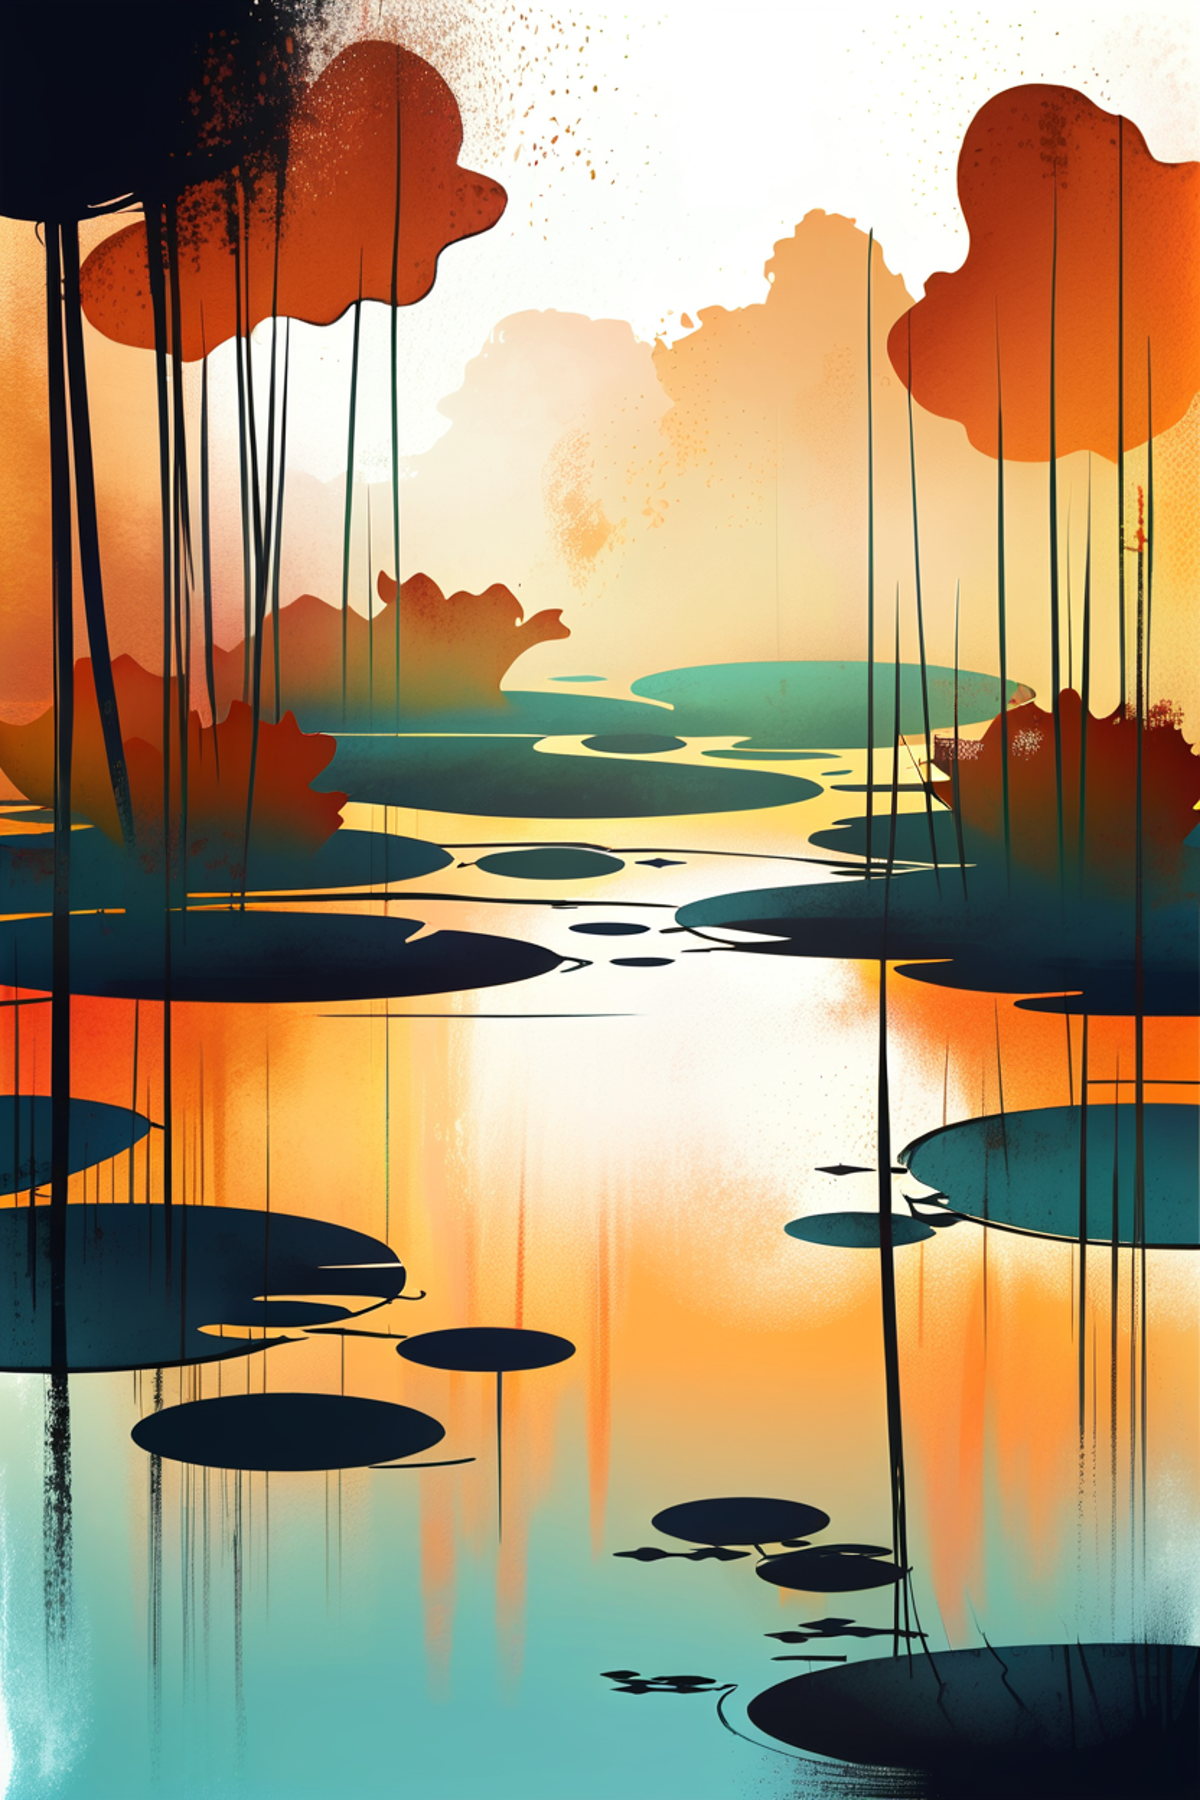 A painting of a swampy river filled with lily pads and surrounded by trees.